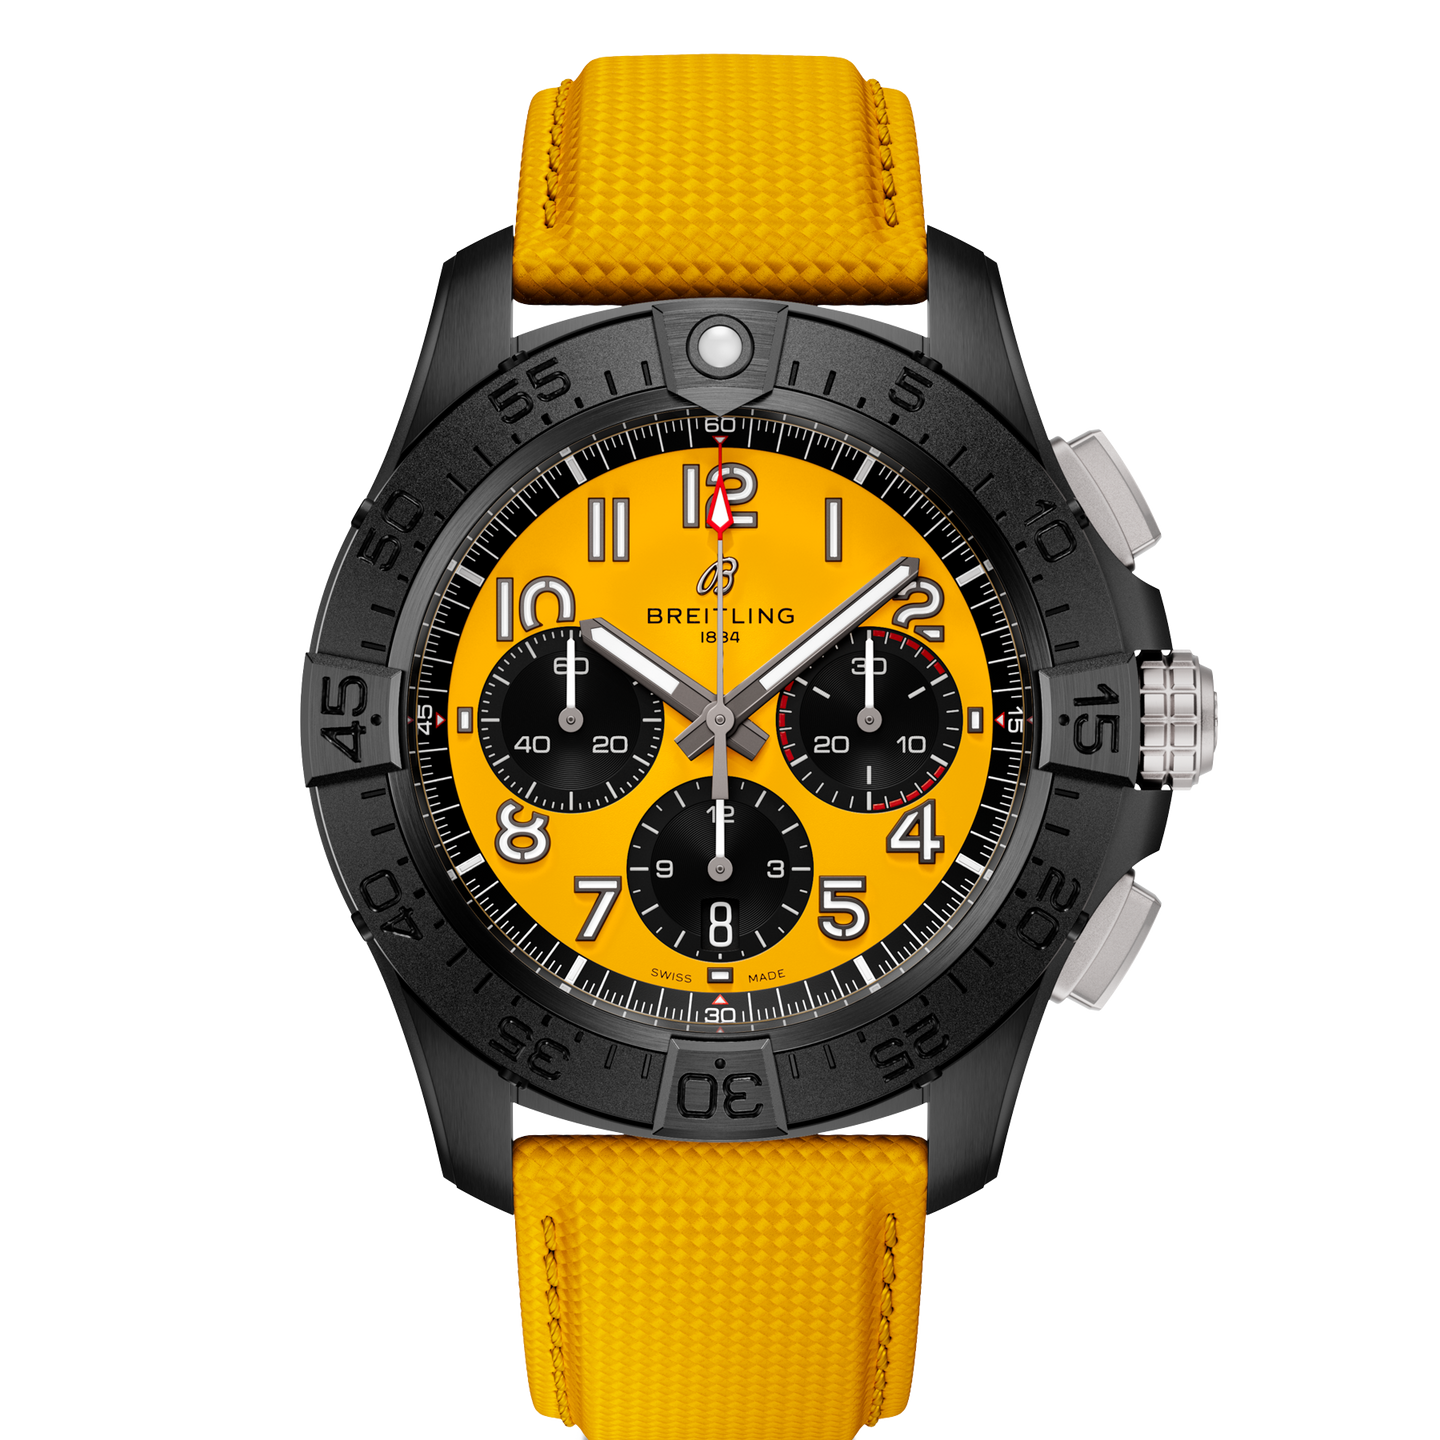 Breitling Avenger B01 Chronograph 44mm Night Mission Watch with Yellow Dial